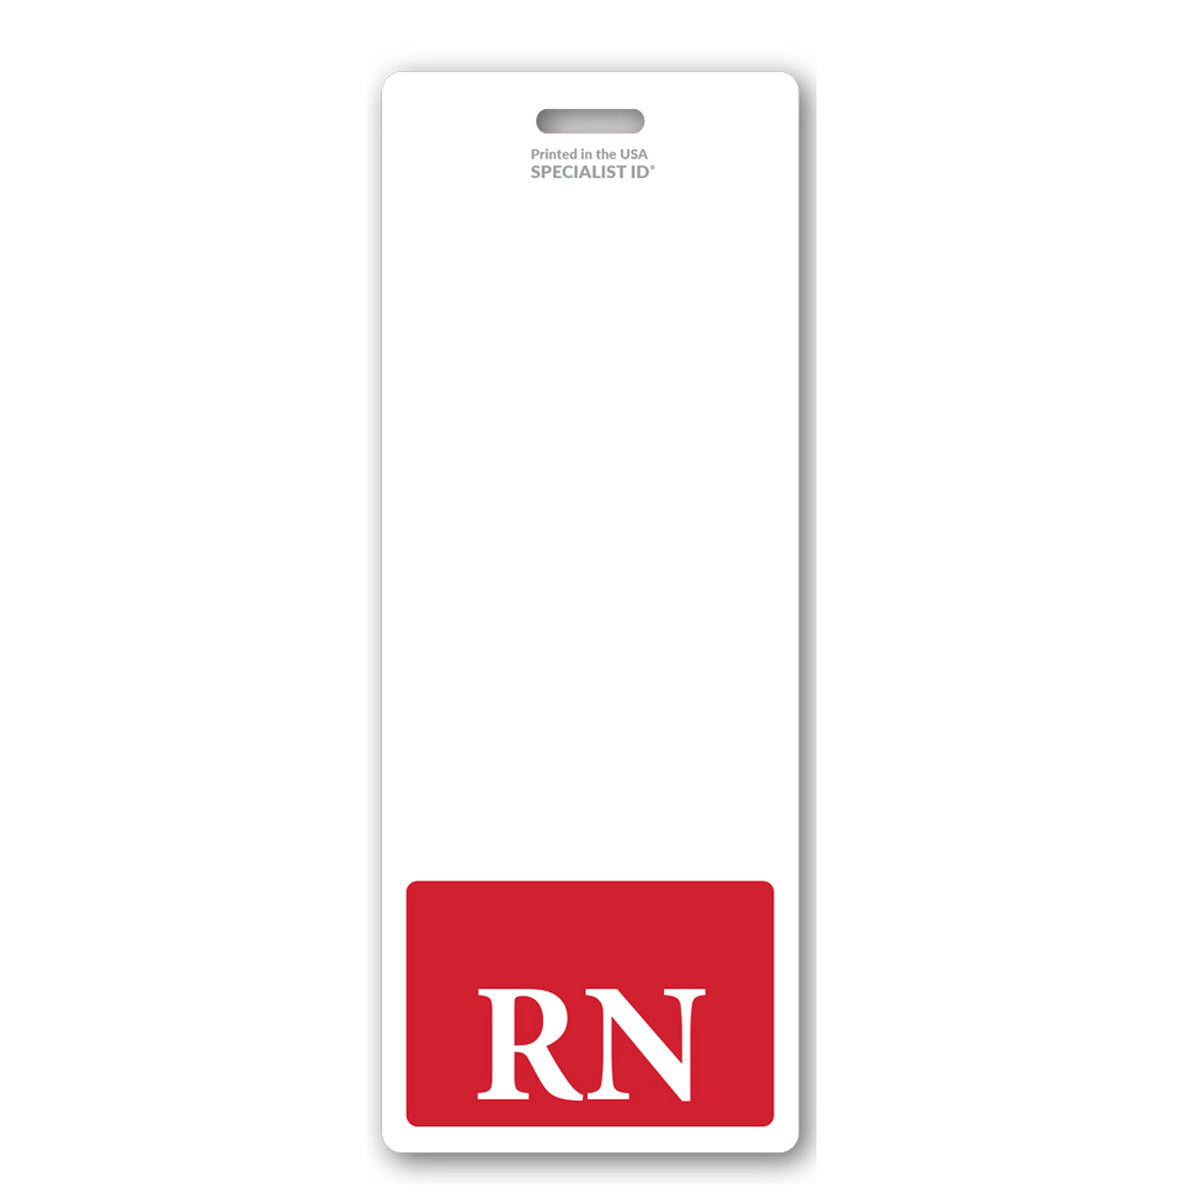 Oversized RN Badge Buddy - Extra Long ID Badge Buddy for Nurses with Red Border